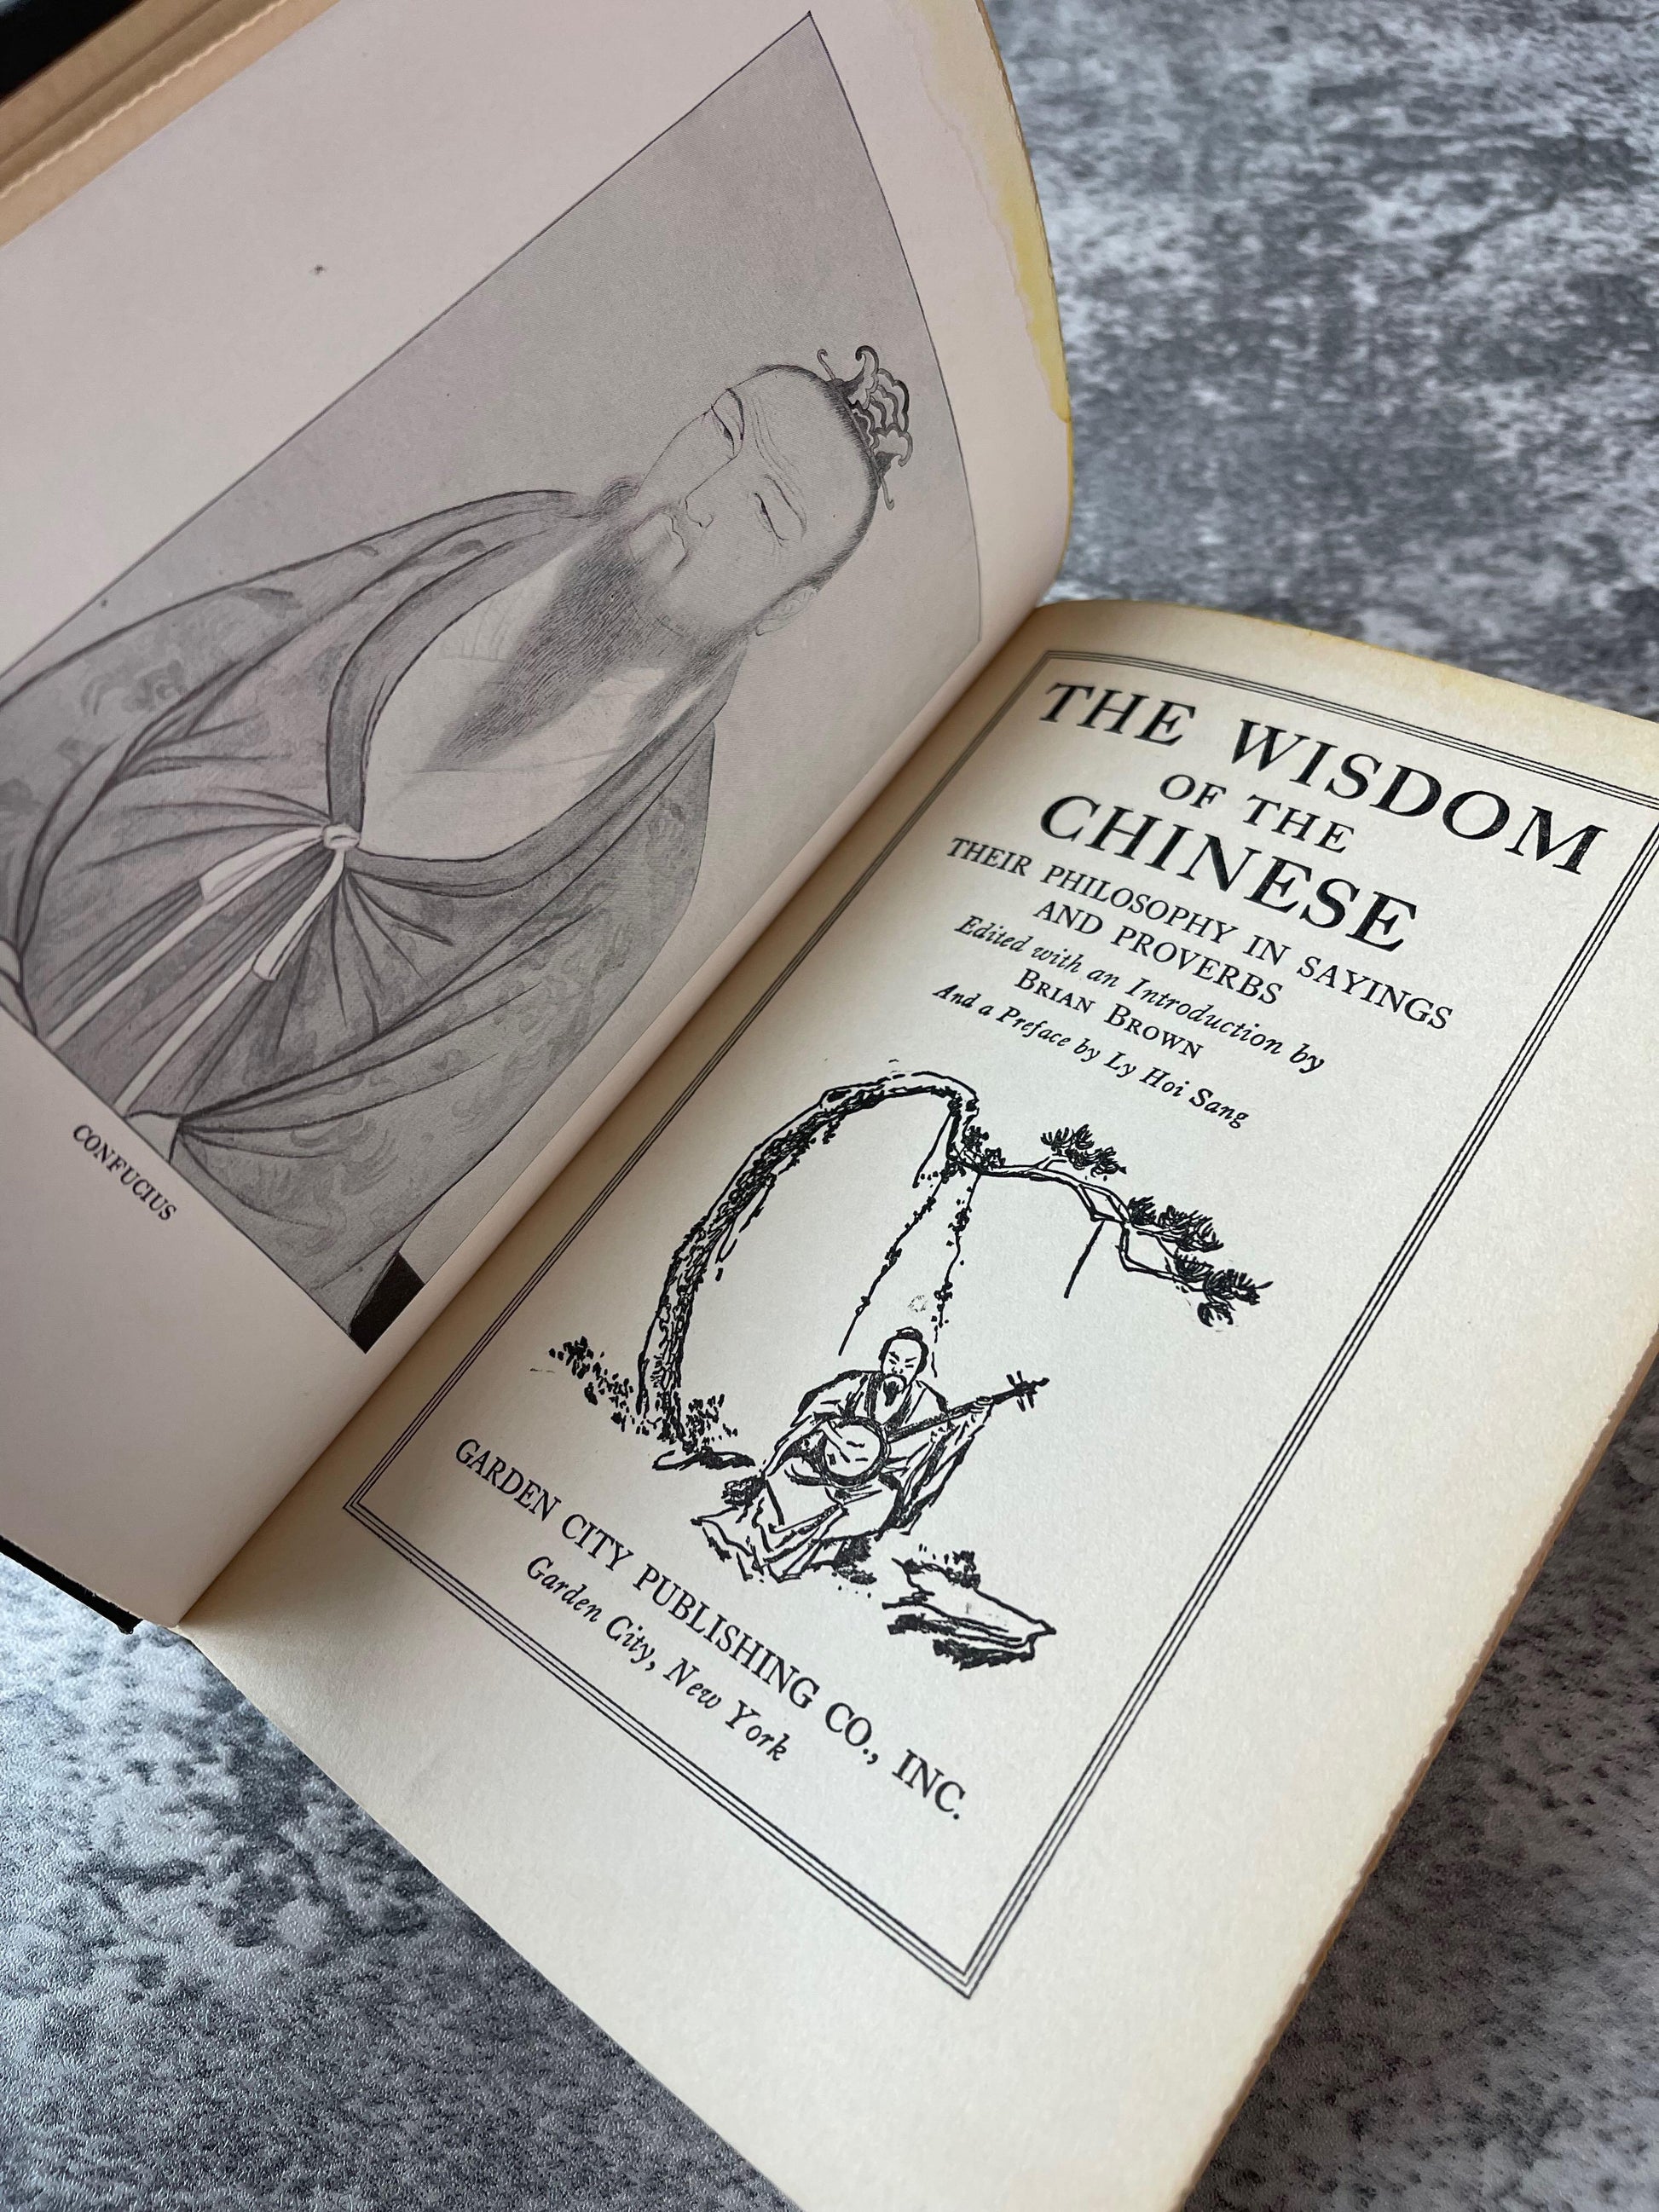 The Wisdom of the Chinese (Their Philosophy in Sayings and Proverbs) / 1938 - Precious Cache